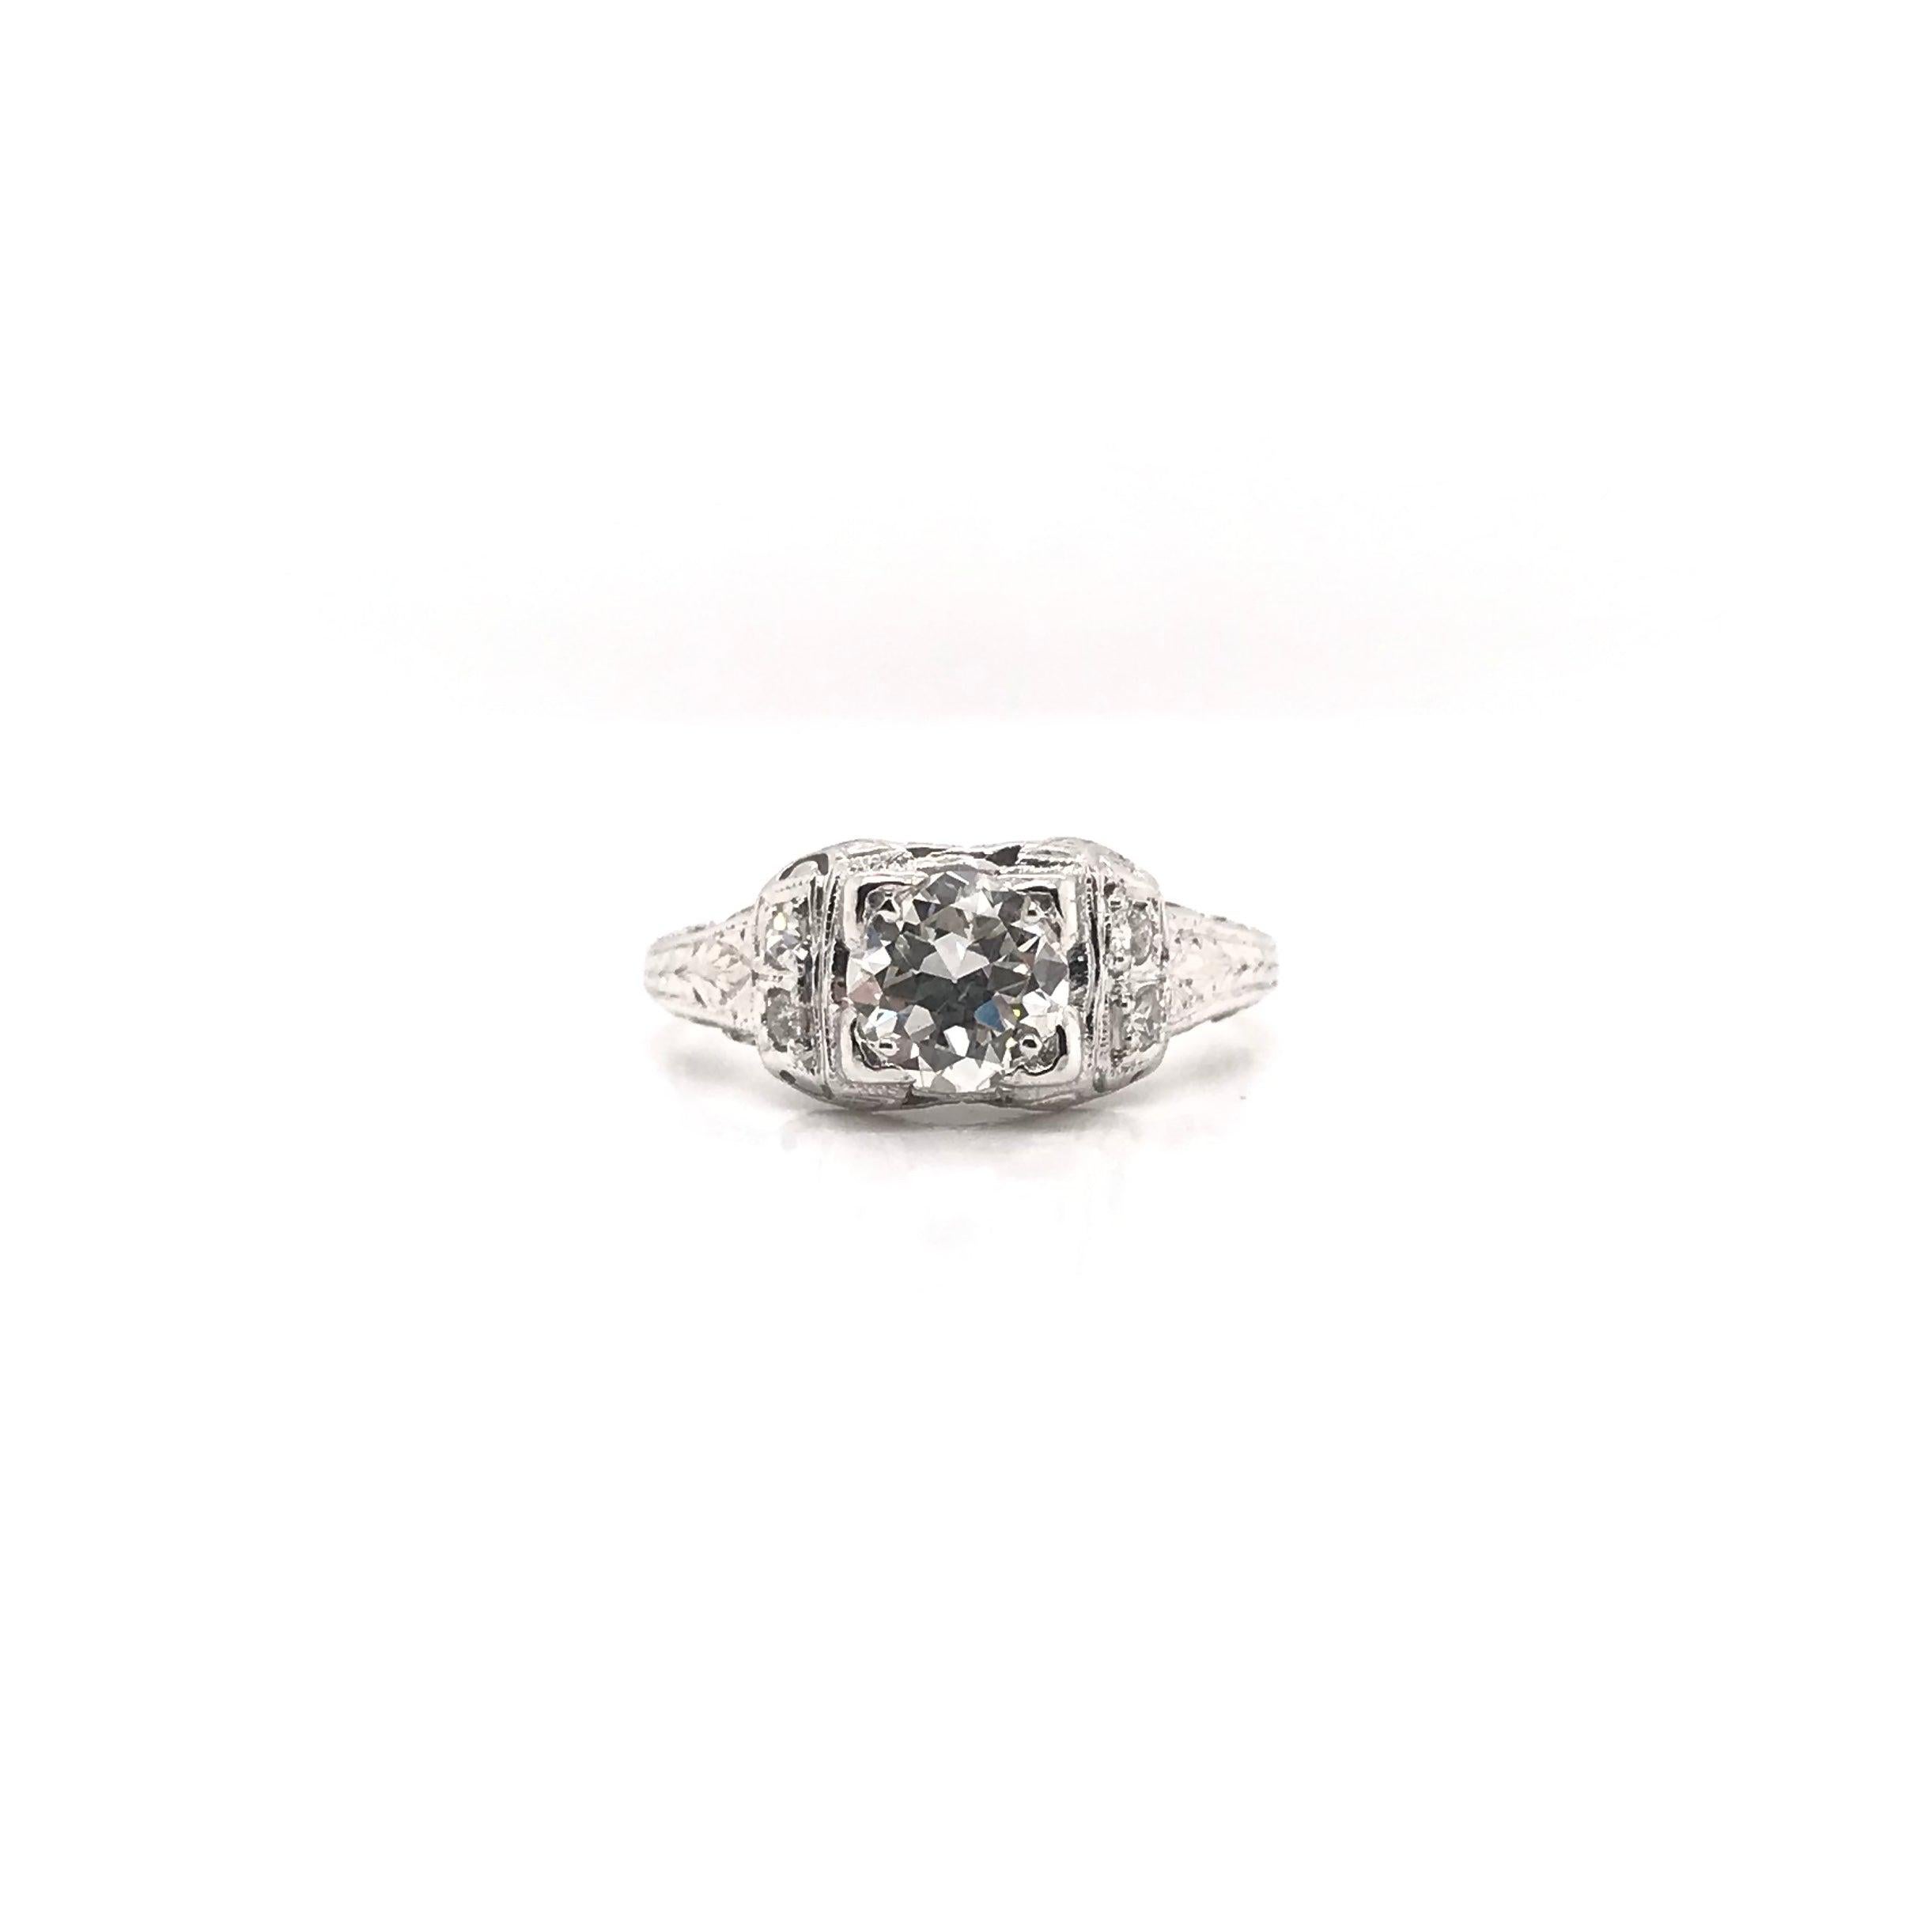 Edwardian 0.74 Carat Diamond and Platinum Filigree Ring In Excellent Condition For Sale In Montgomery, AL